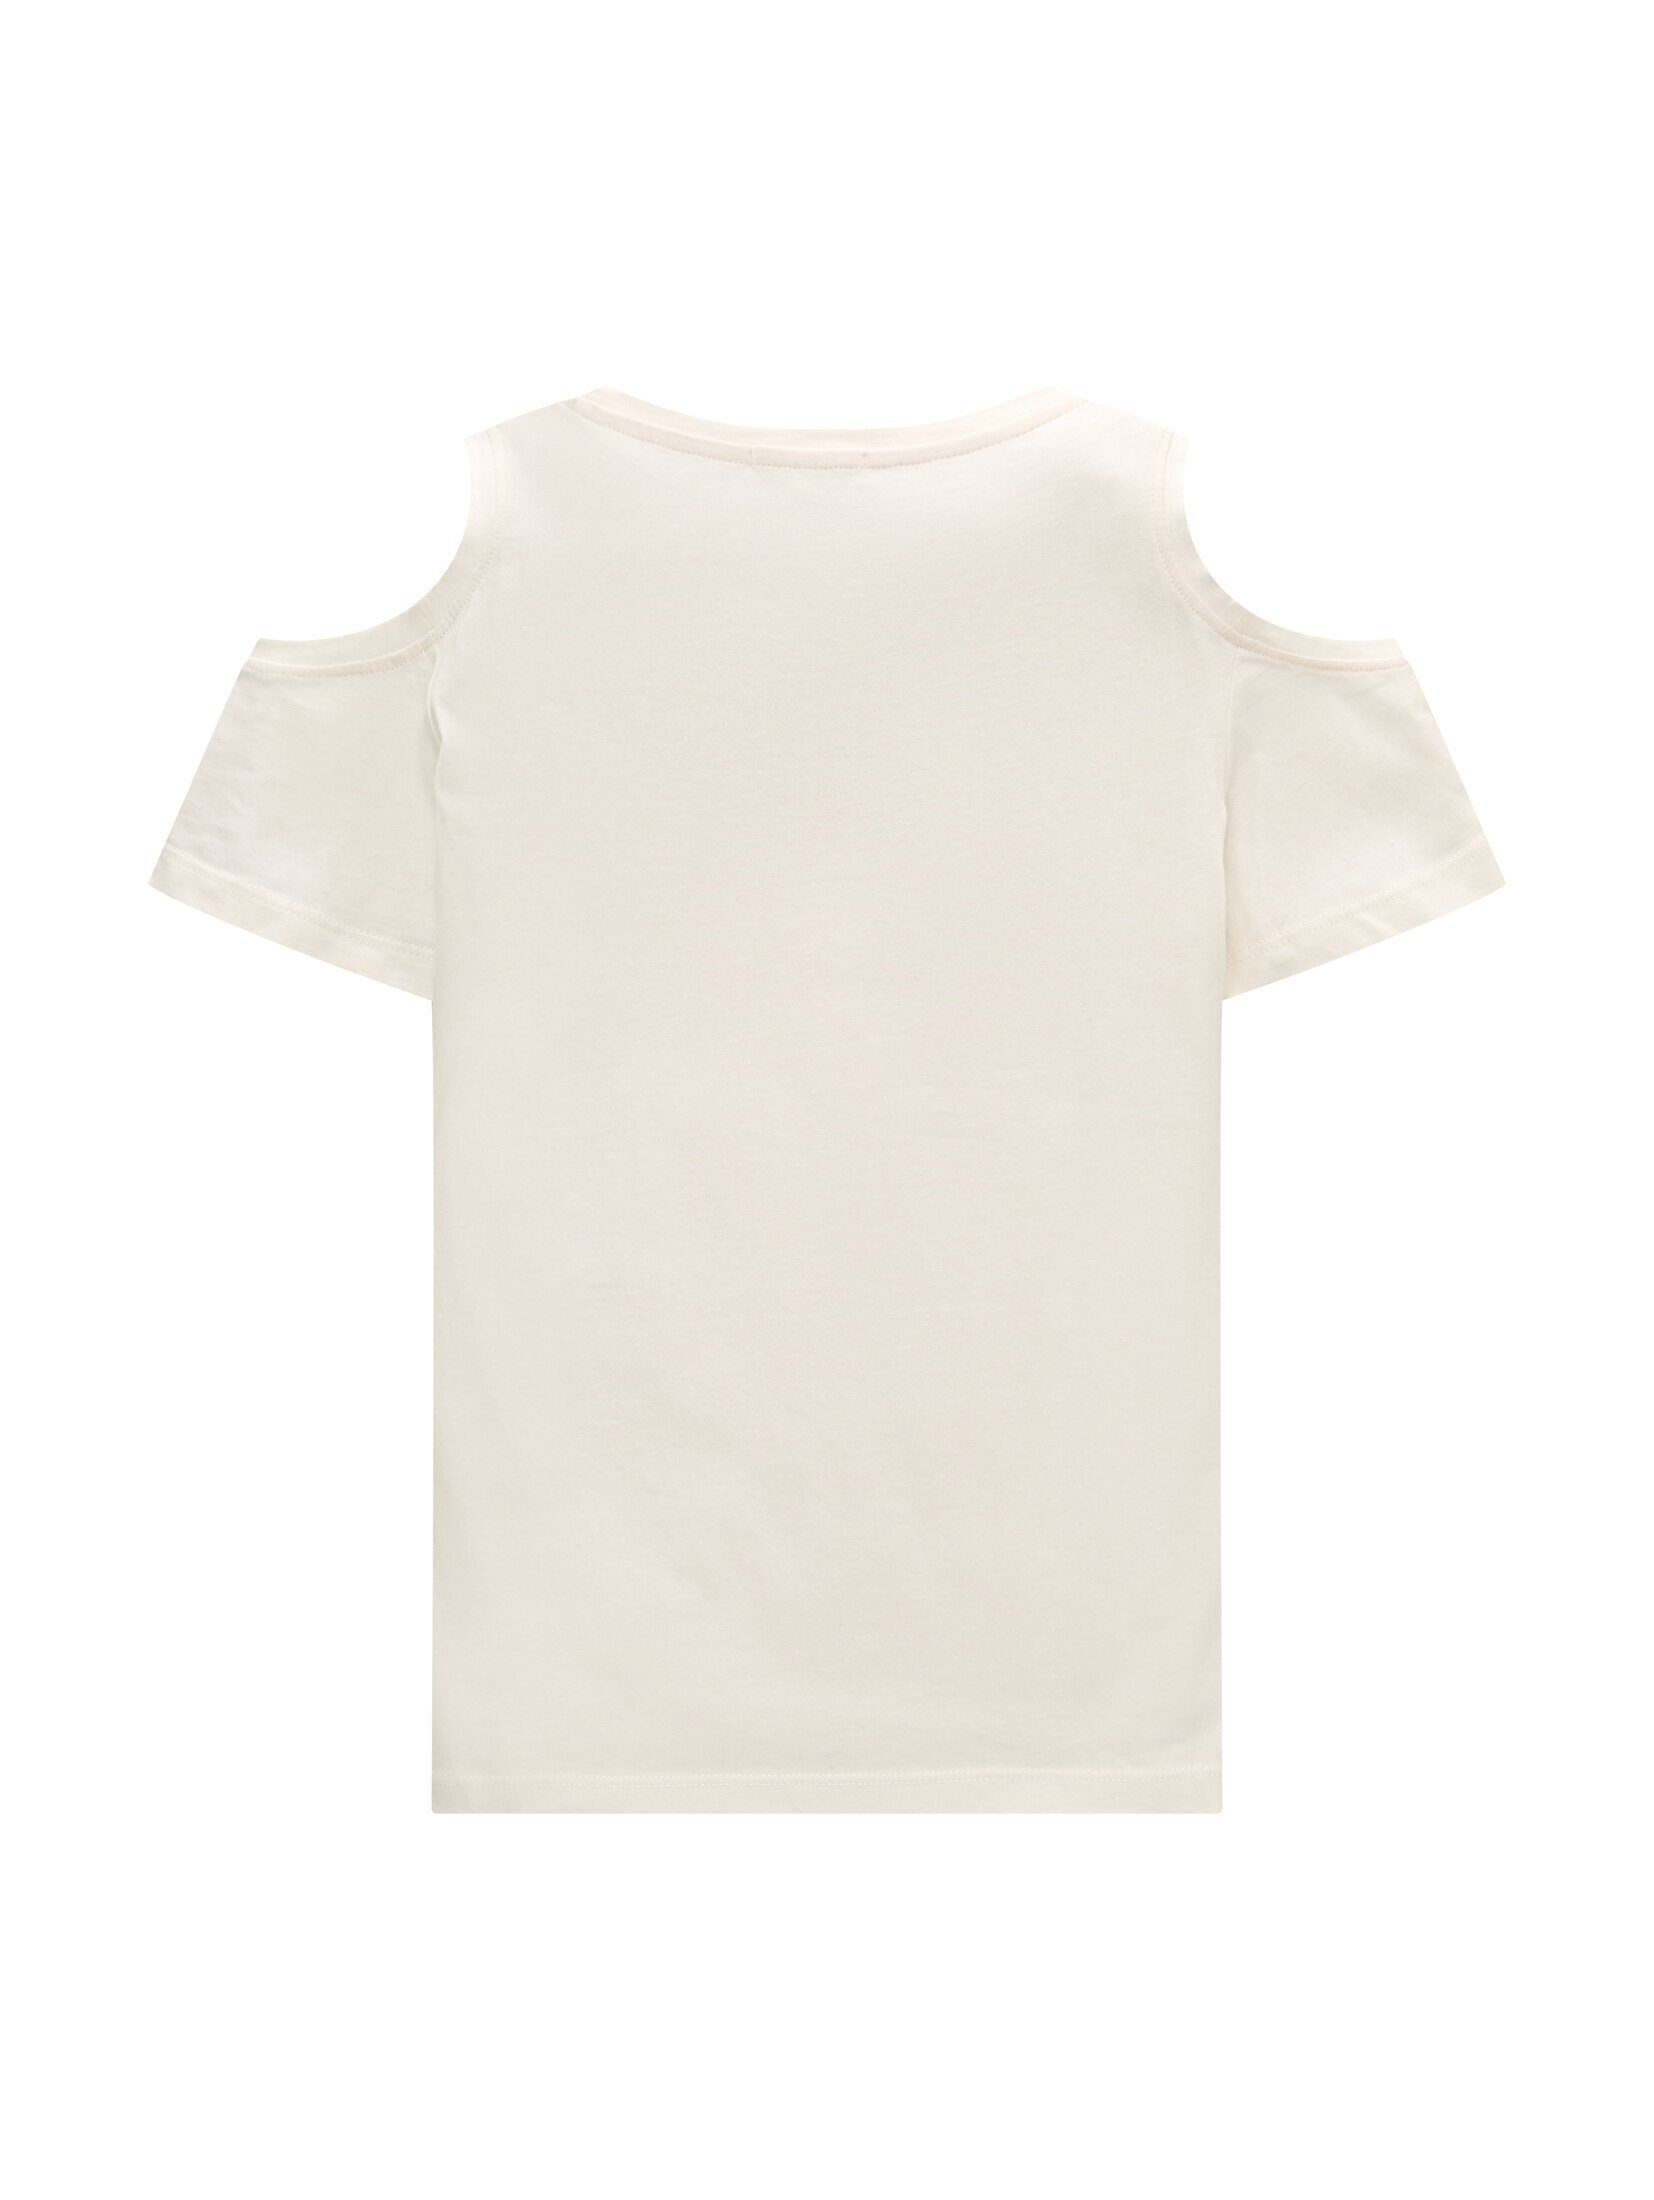 TOM TAILOR T-Shirt T-Shirt White mit Wool Cut-Outs